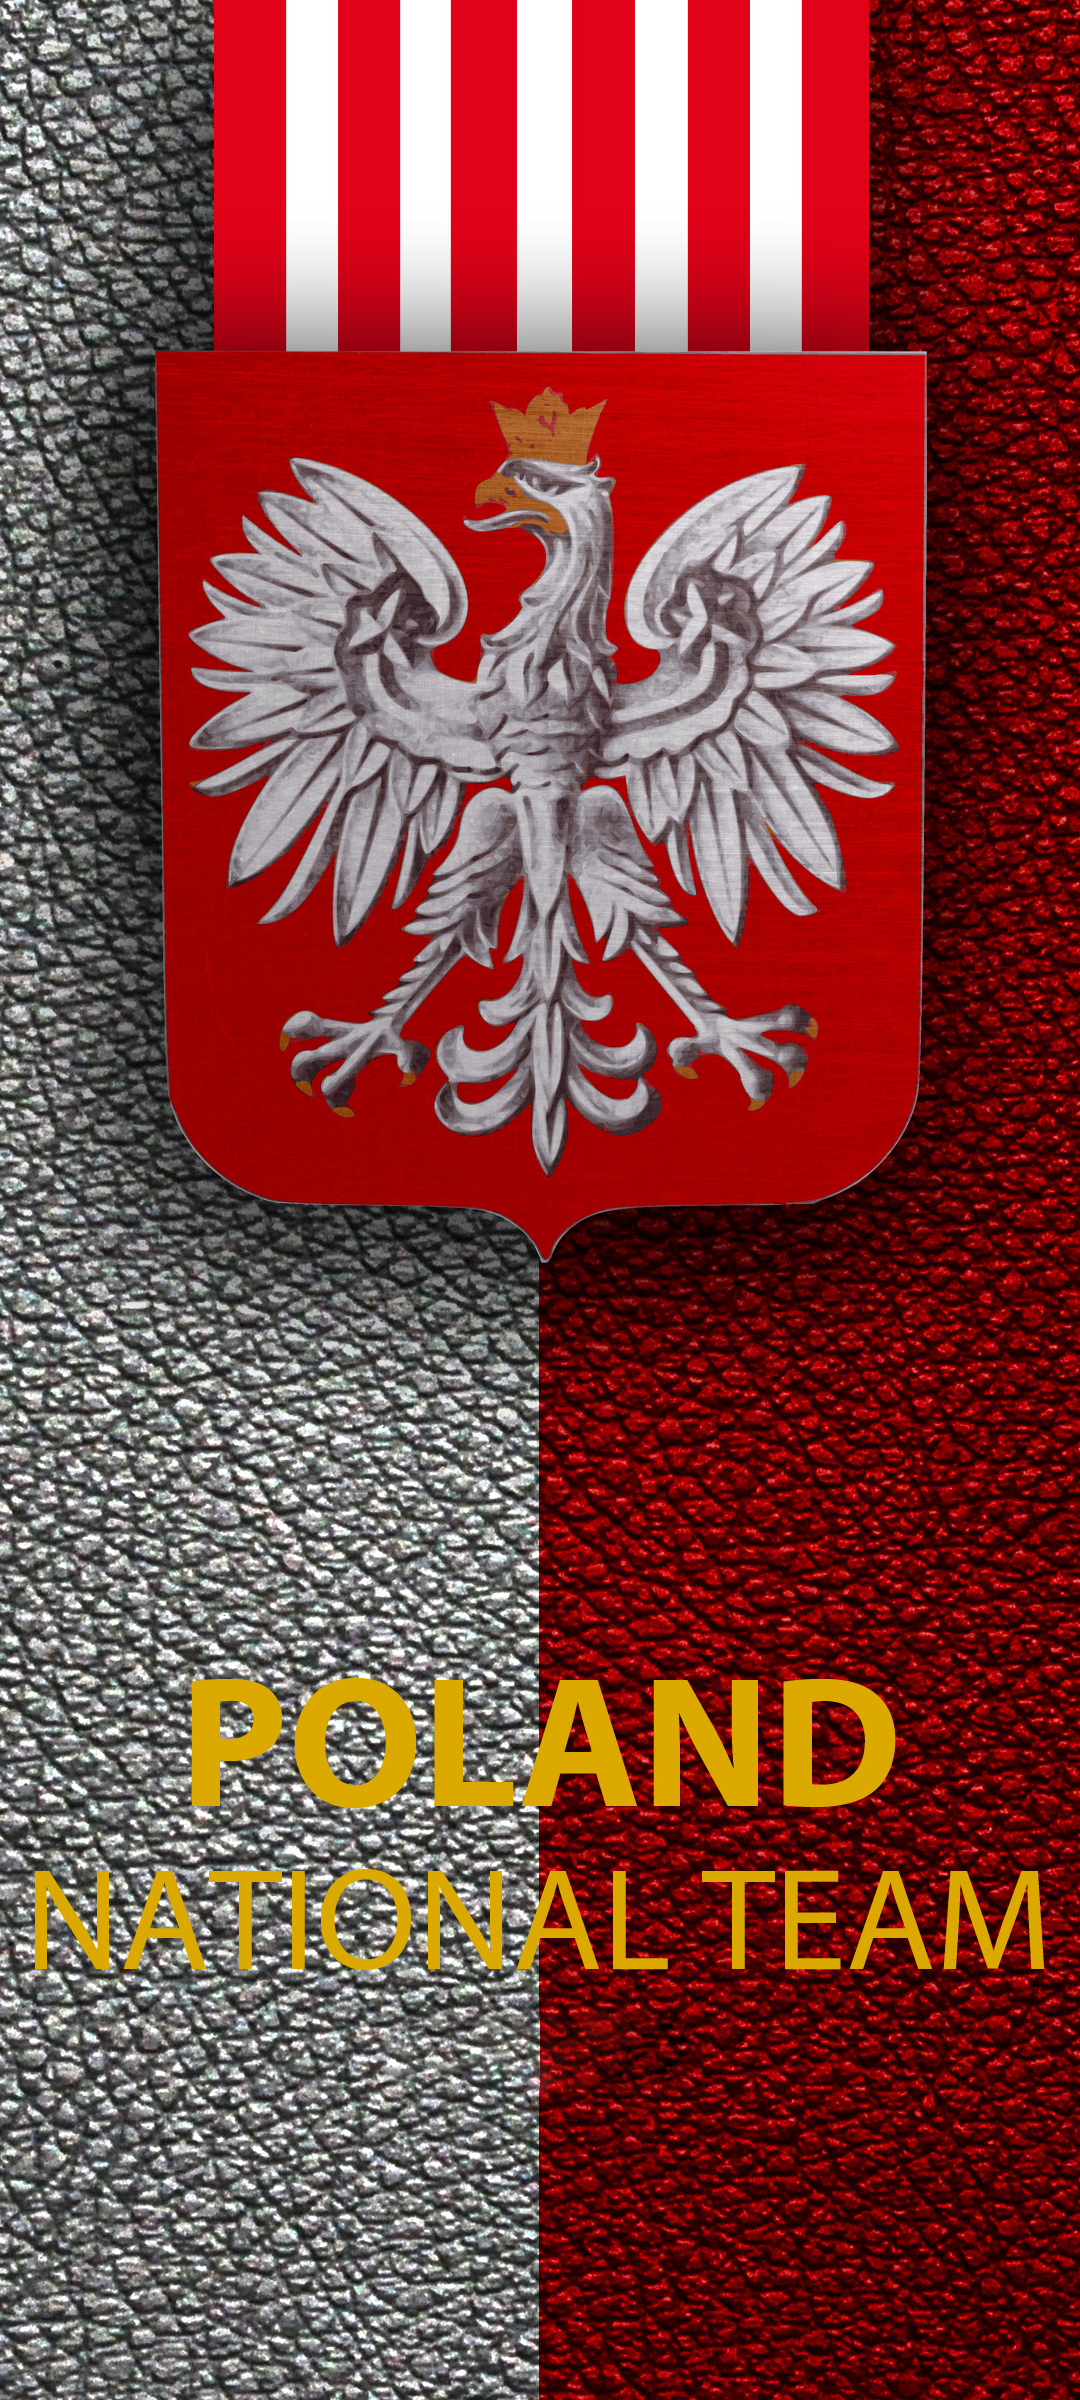 Poland National Football Team Phone Wallpaper - Mobile Abyss